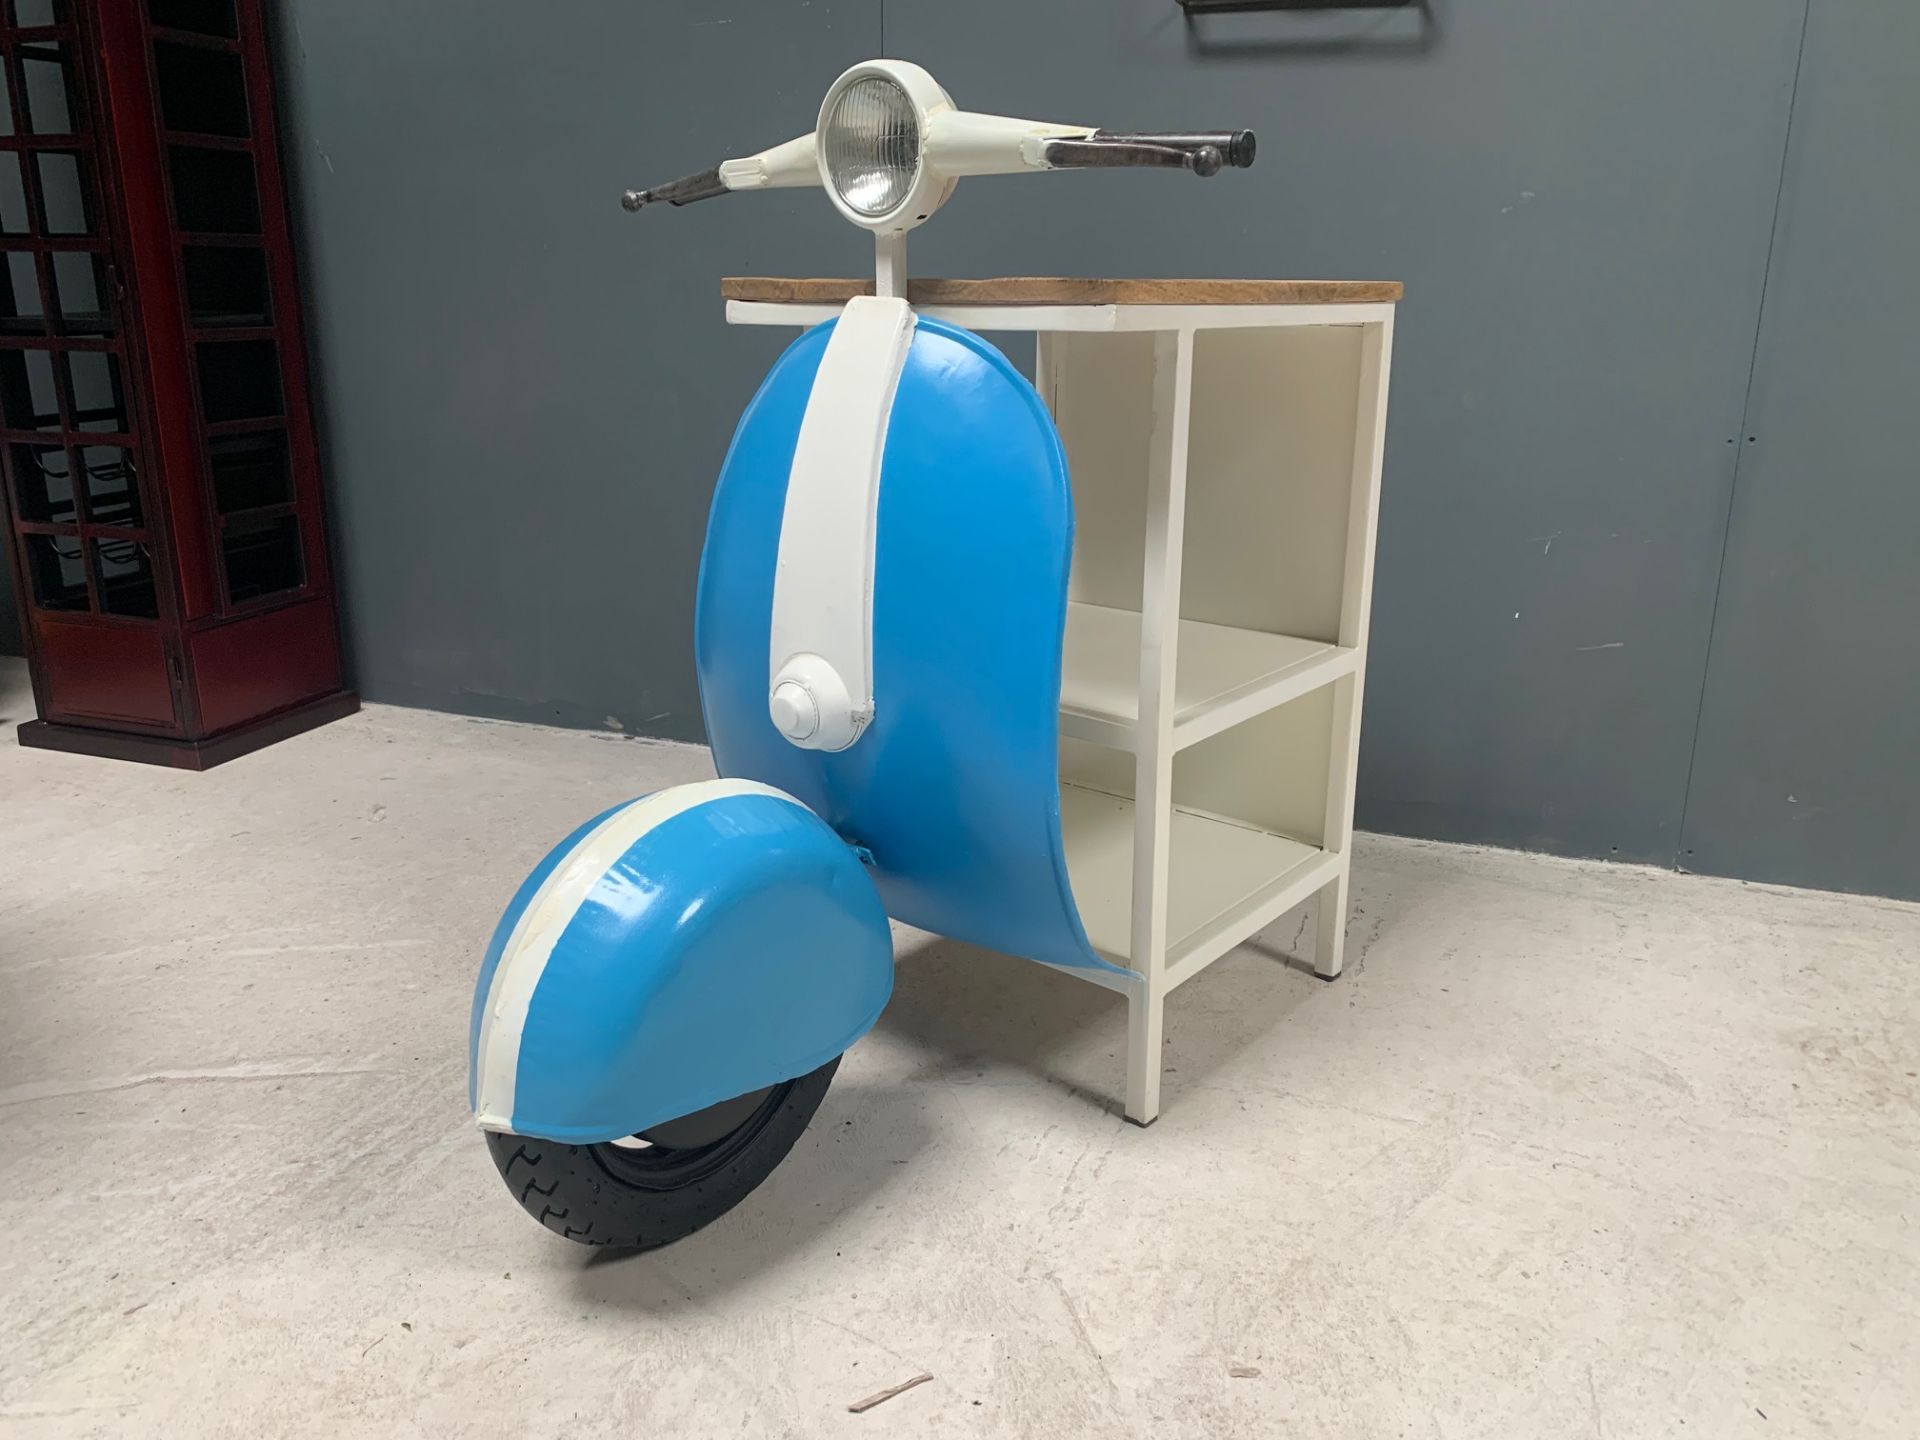 Brand New Boxed Blue And White Vintage Retro Vespa Side Tables With Handle Bars + Wheel - Image 2 of 4